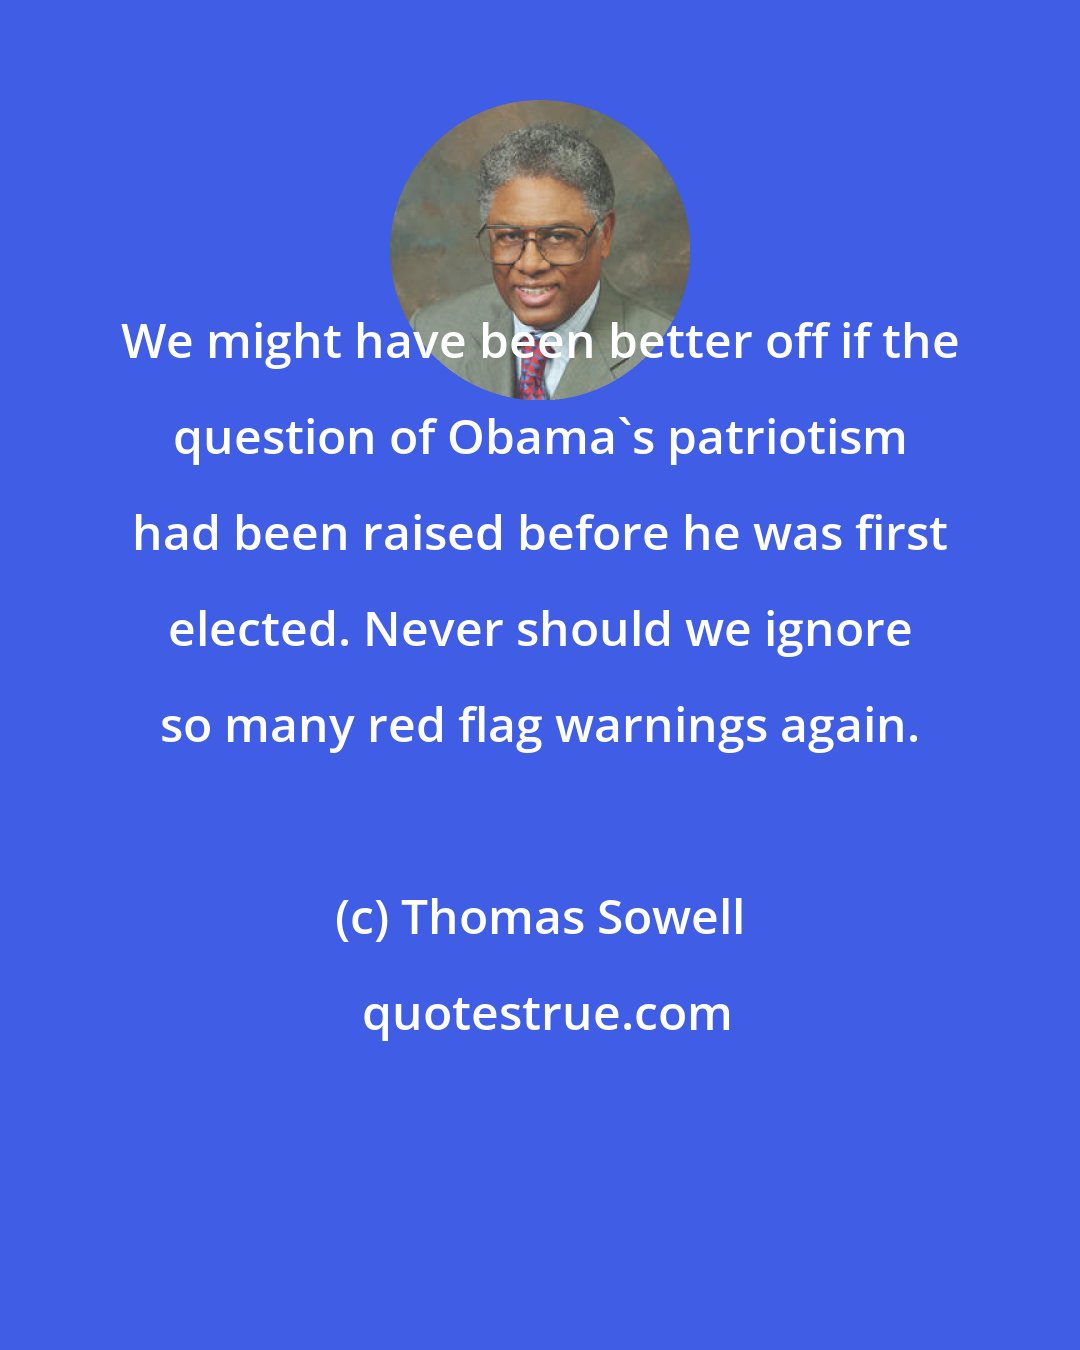 Thomas Sowell: We might have been better off if the question of Obama's patriotism had been raised before he was first elected. Never should we ignore so many red flag warnings again.